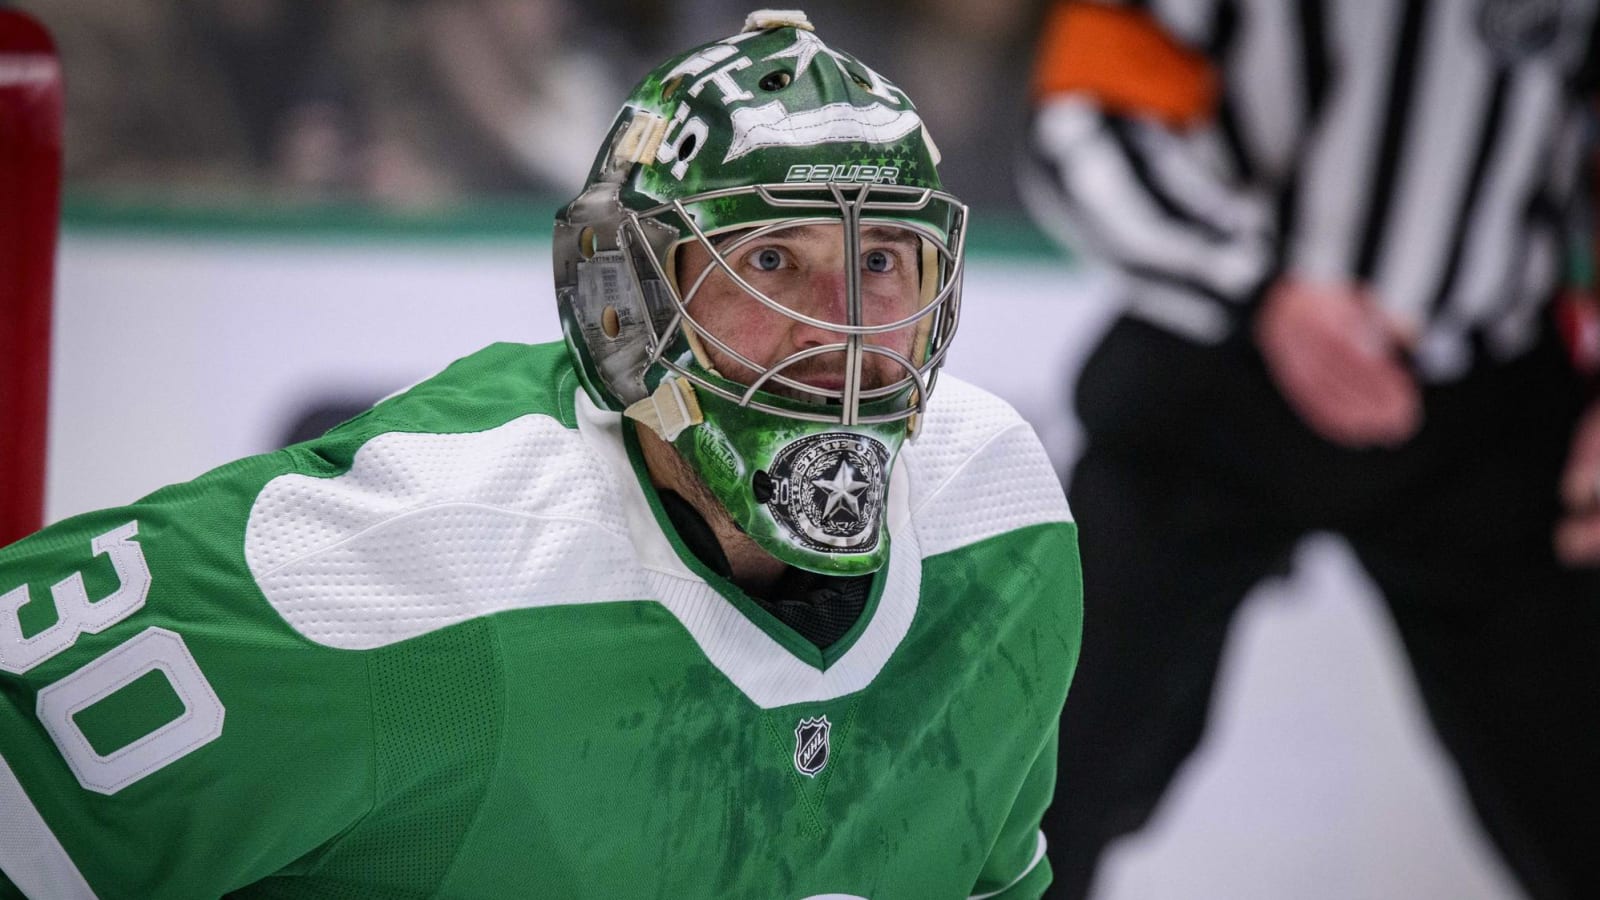 Stars haven't asked Ben Bishop to waive no-move protection